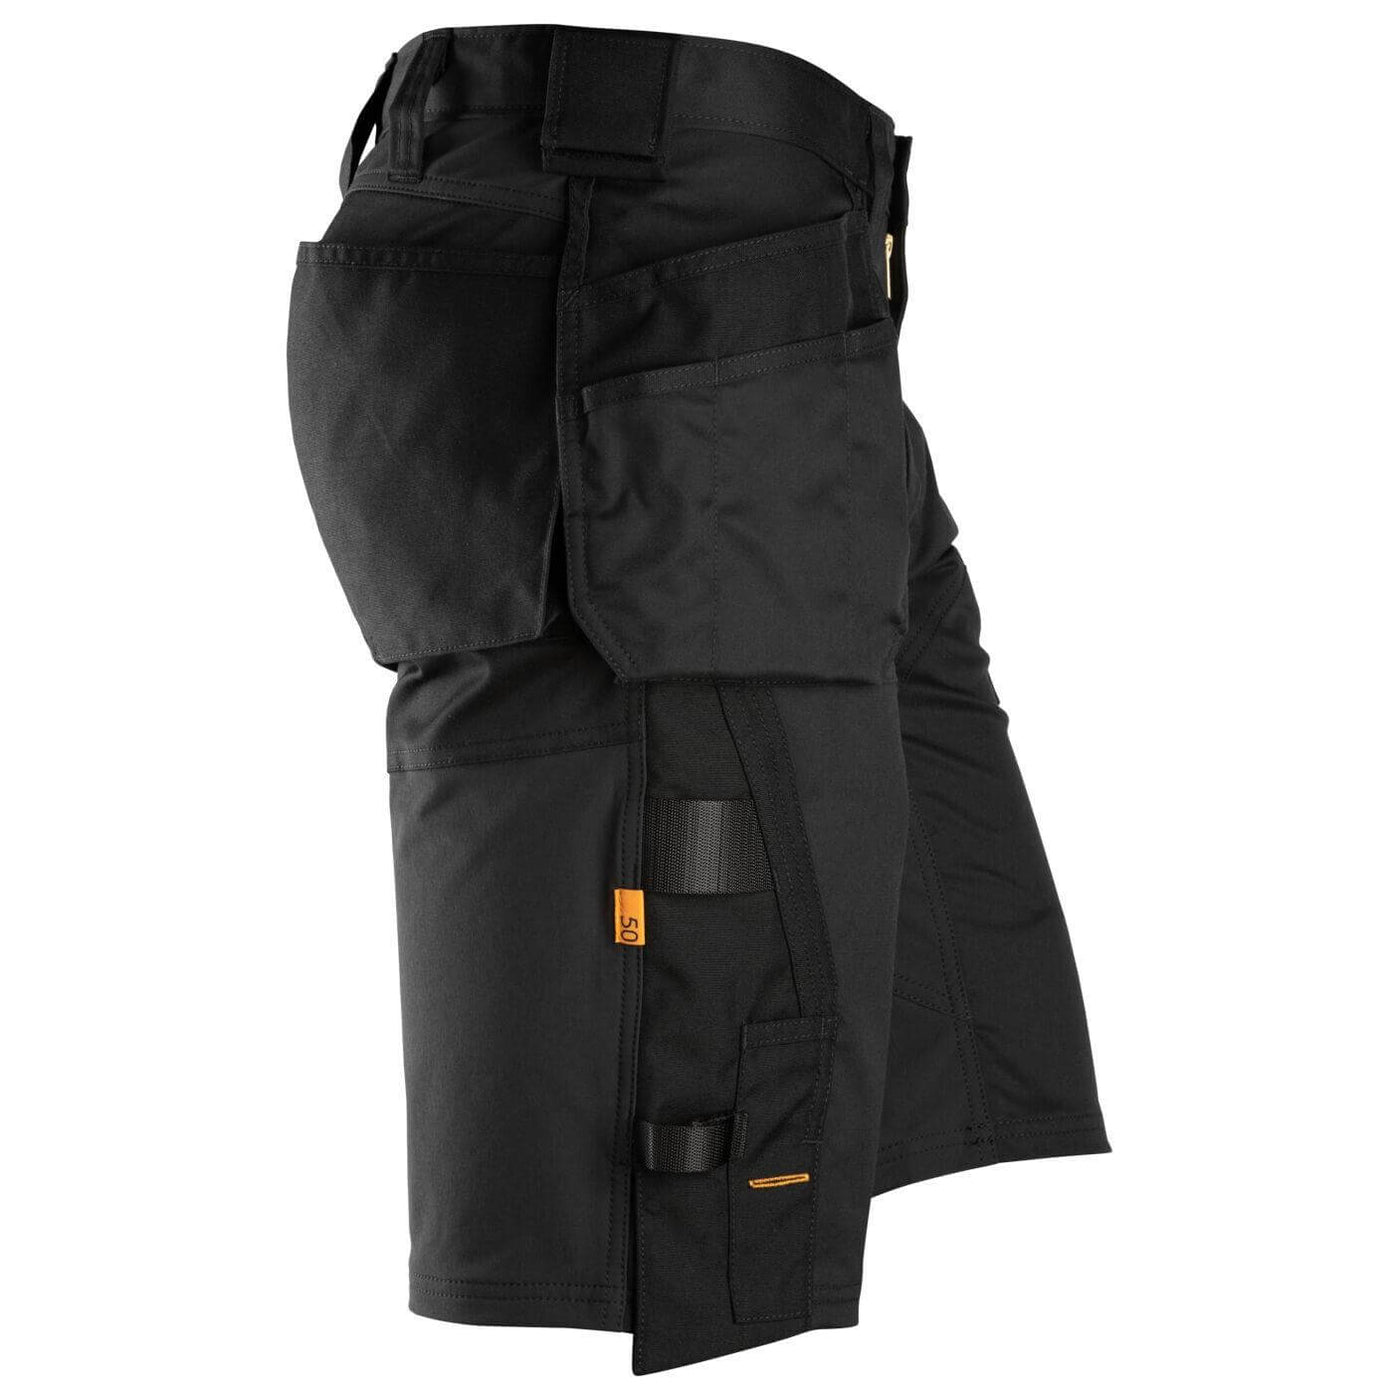 Snickers 6151 AllroundWork Stretch Loose Fit Work Shorts Holster Pockets Black Black right #colour_black-black